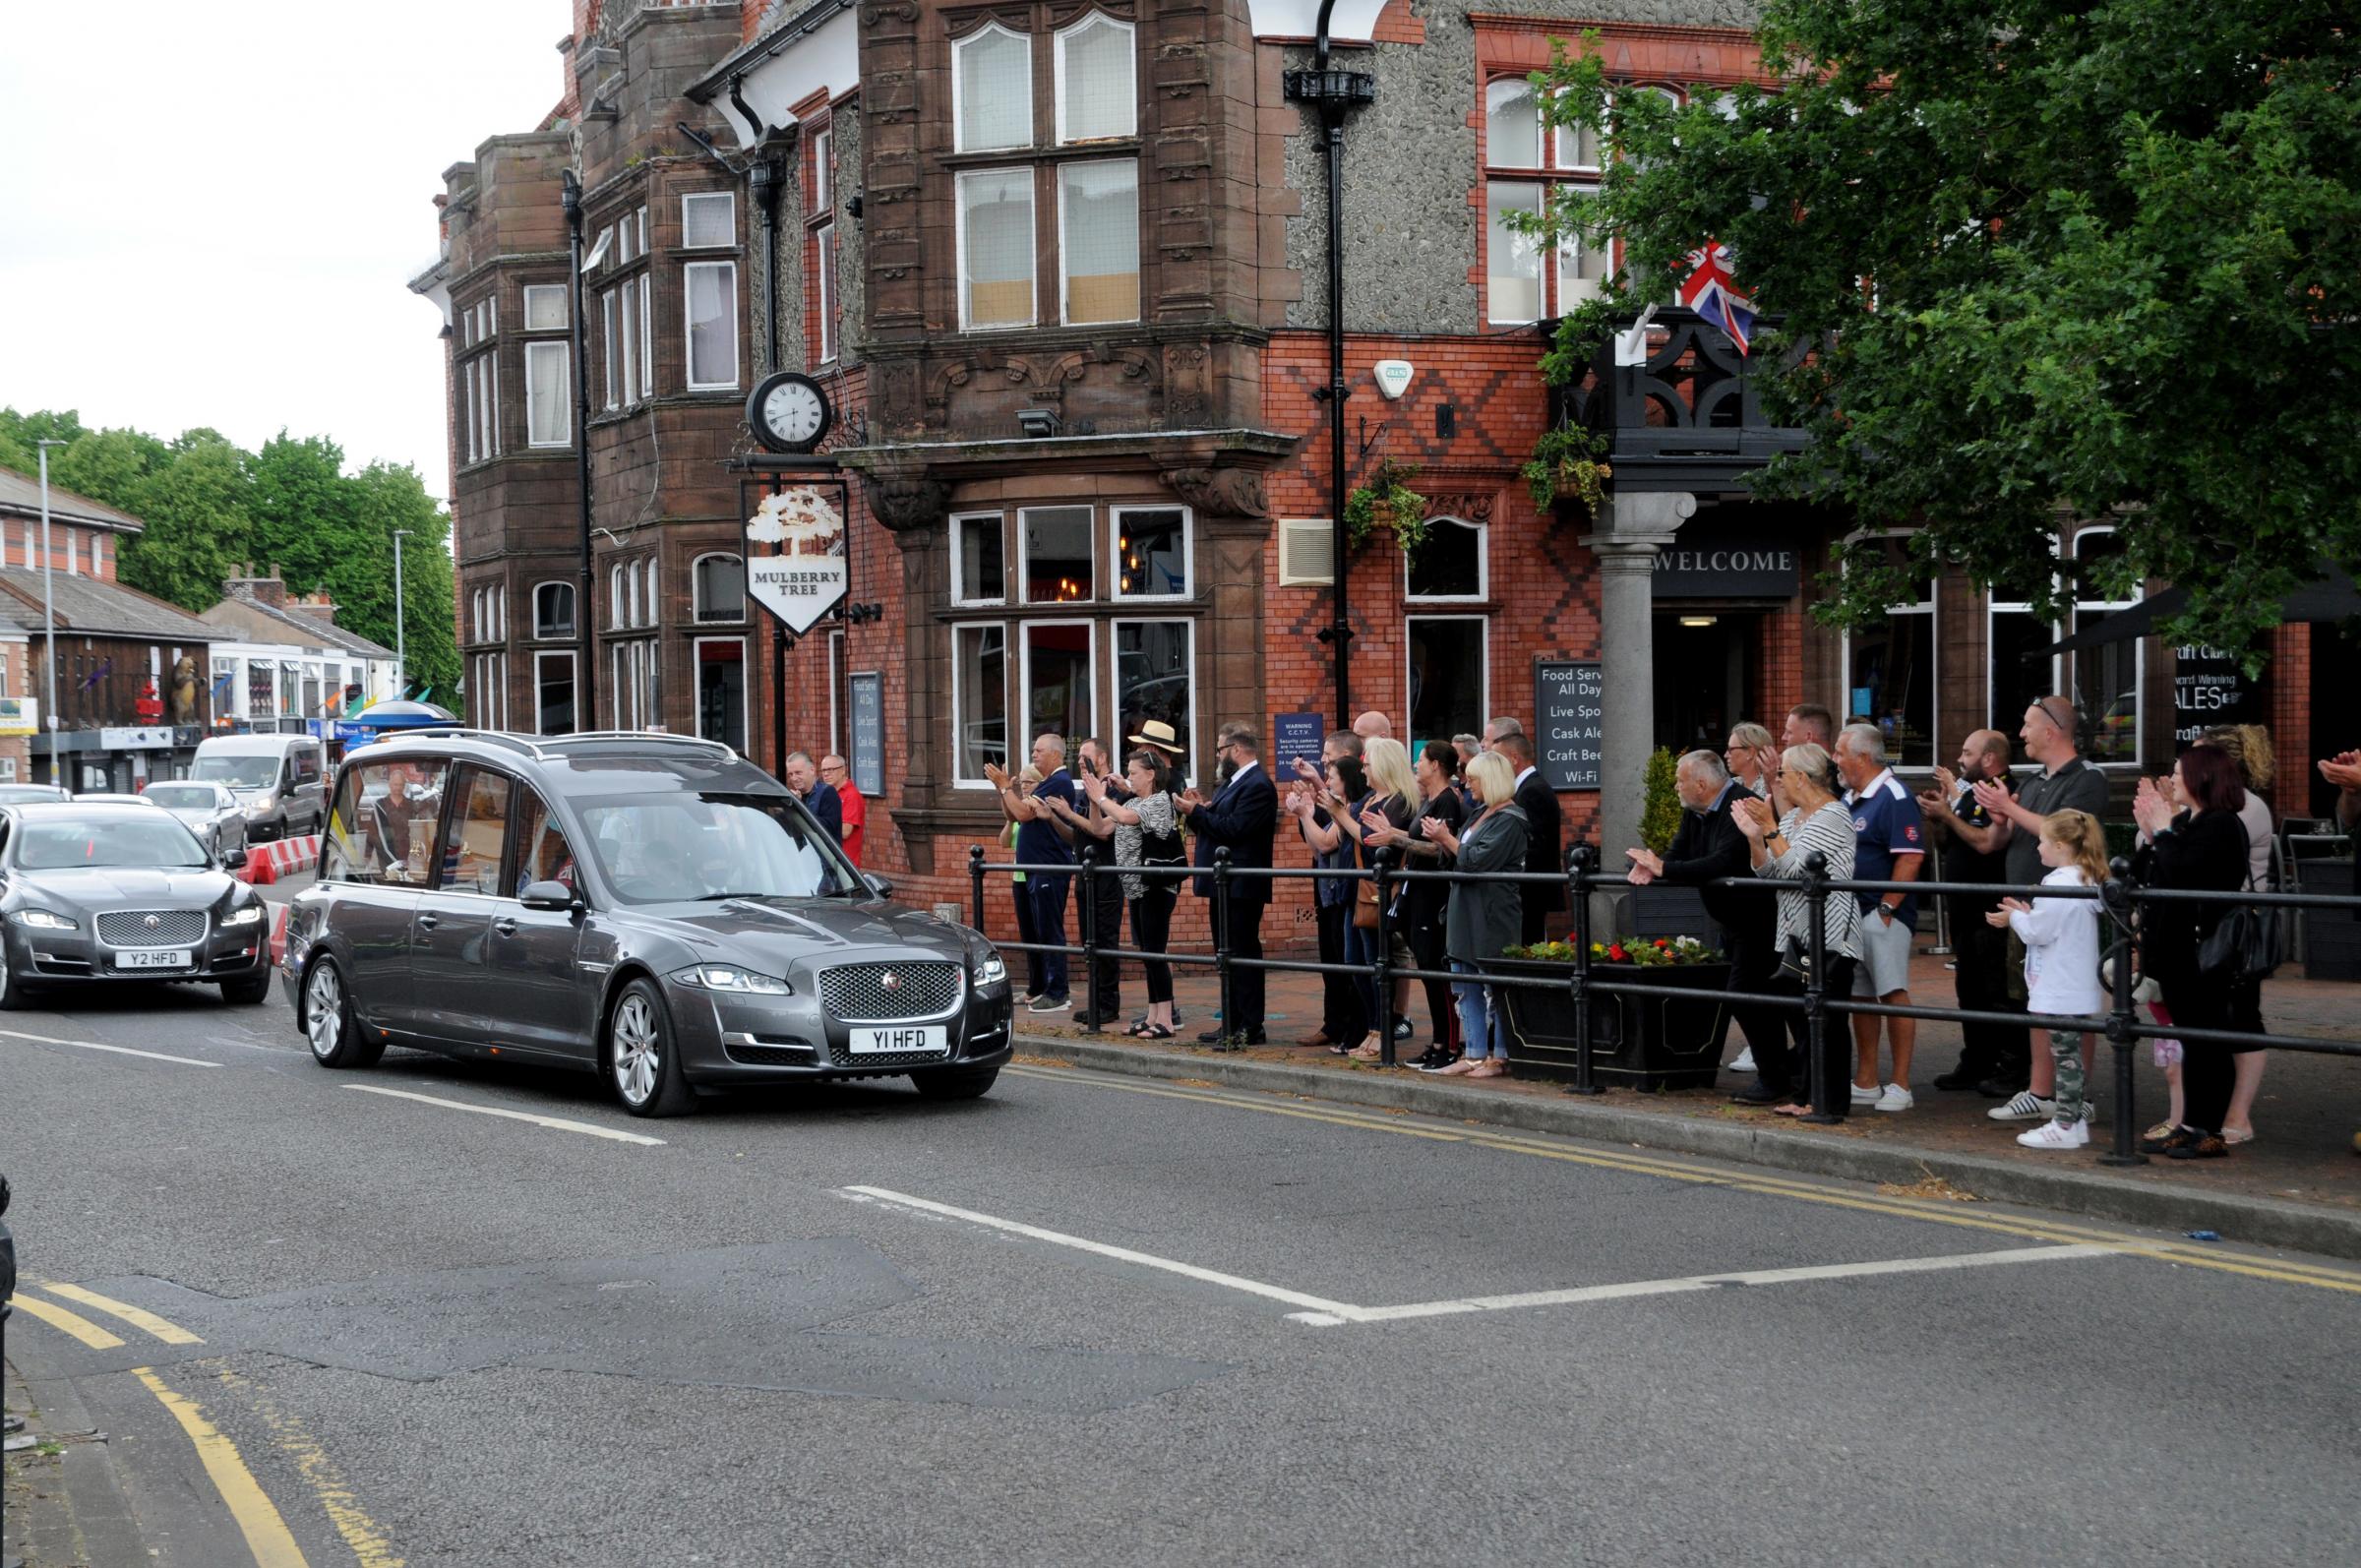 Chris Culletons funeral